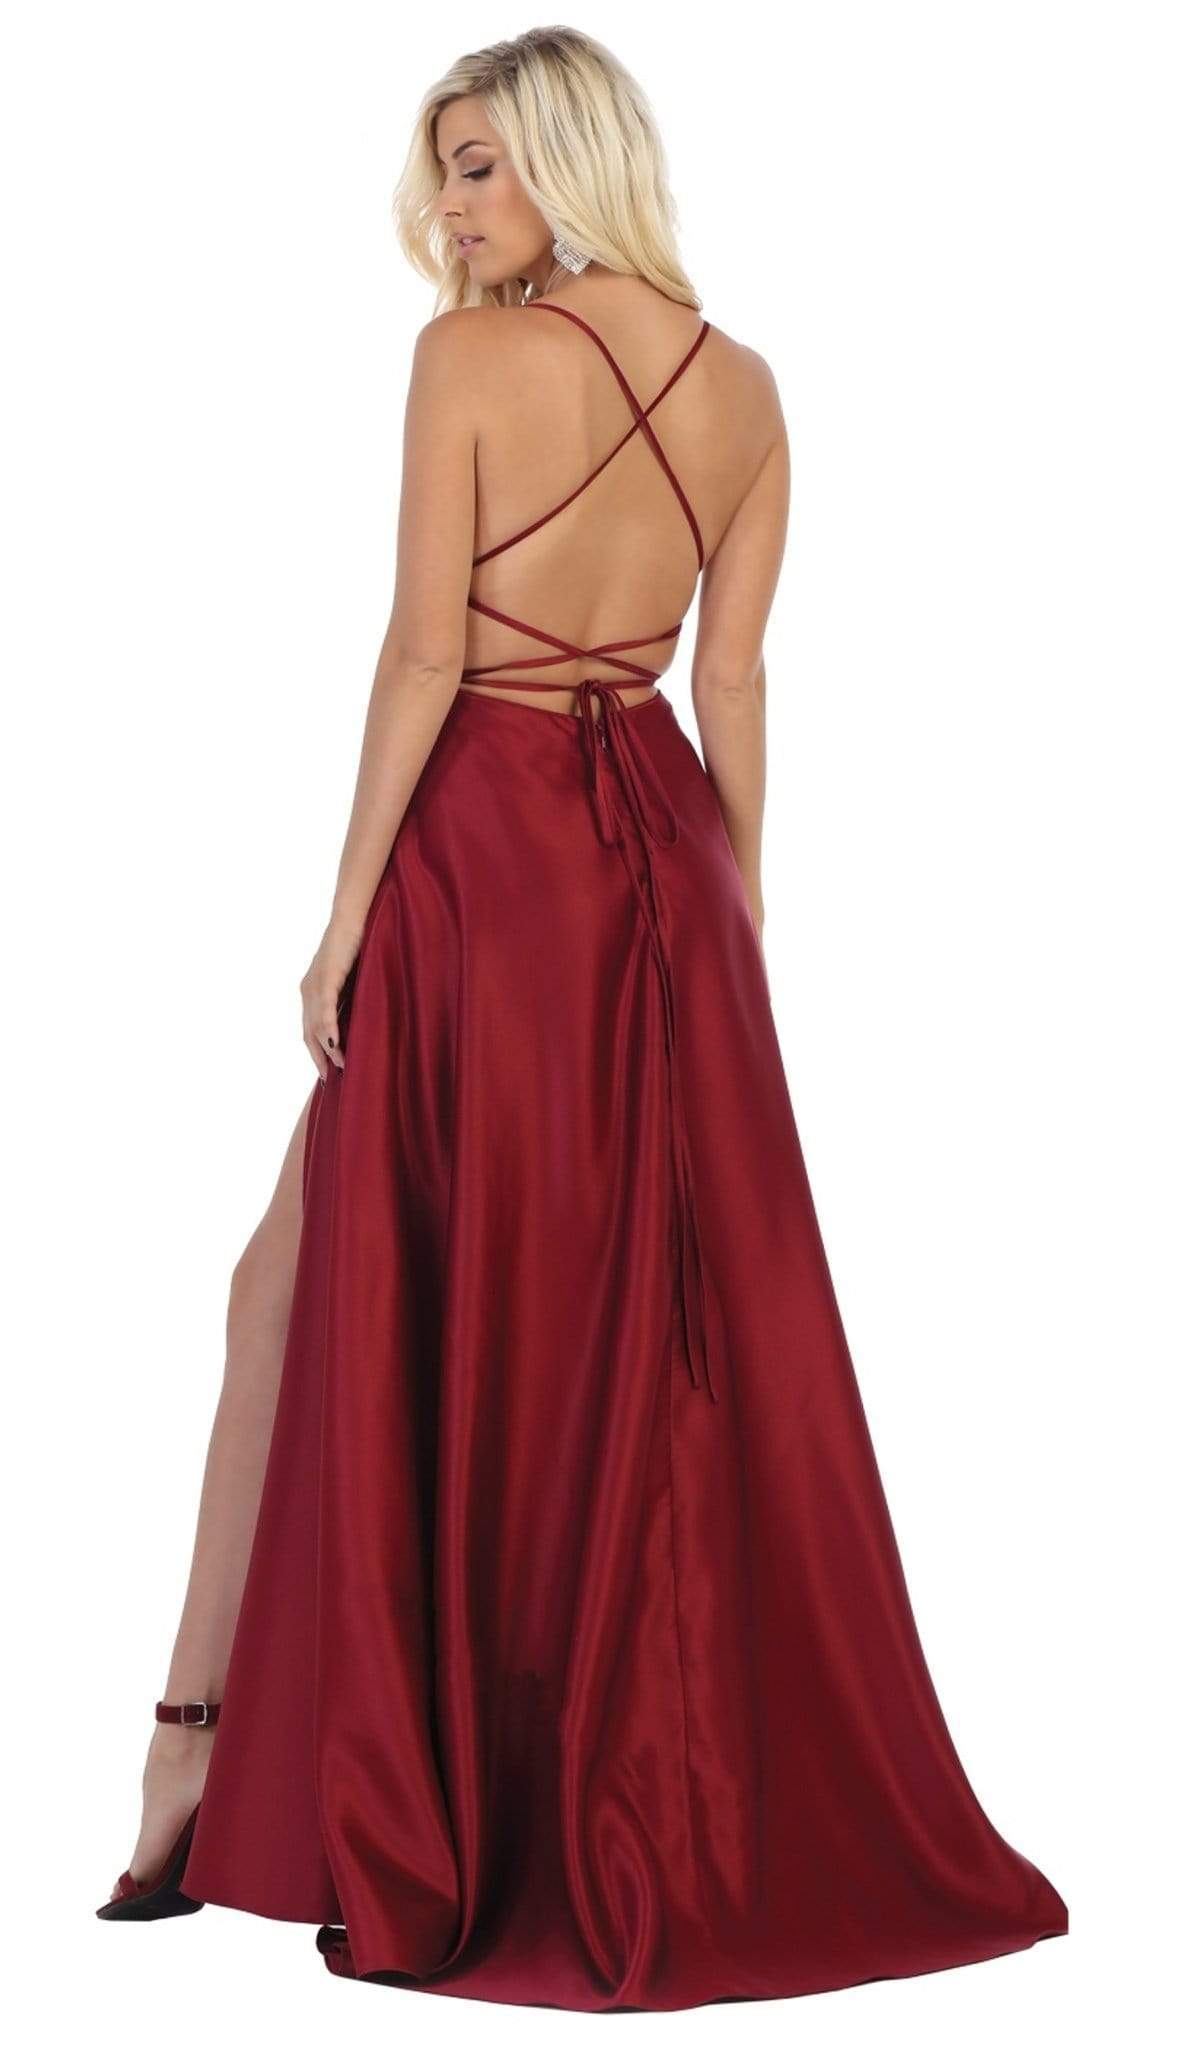 May Queen - RQ7711 Sleeveless Square Neck Tie String Back Satin Gown Bridesmaid Dresses